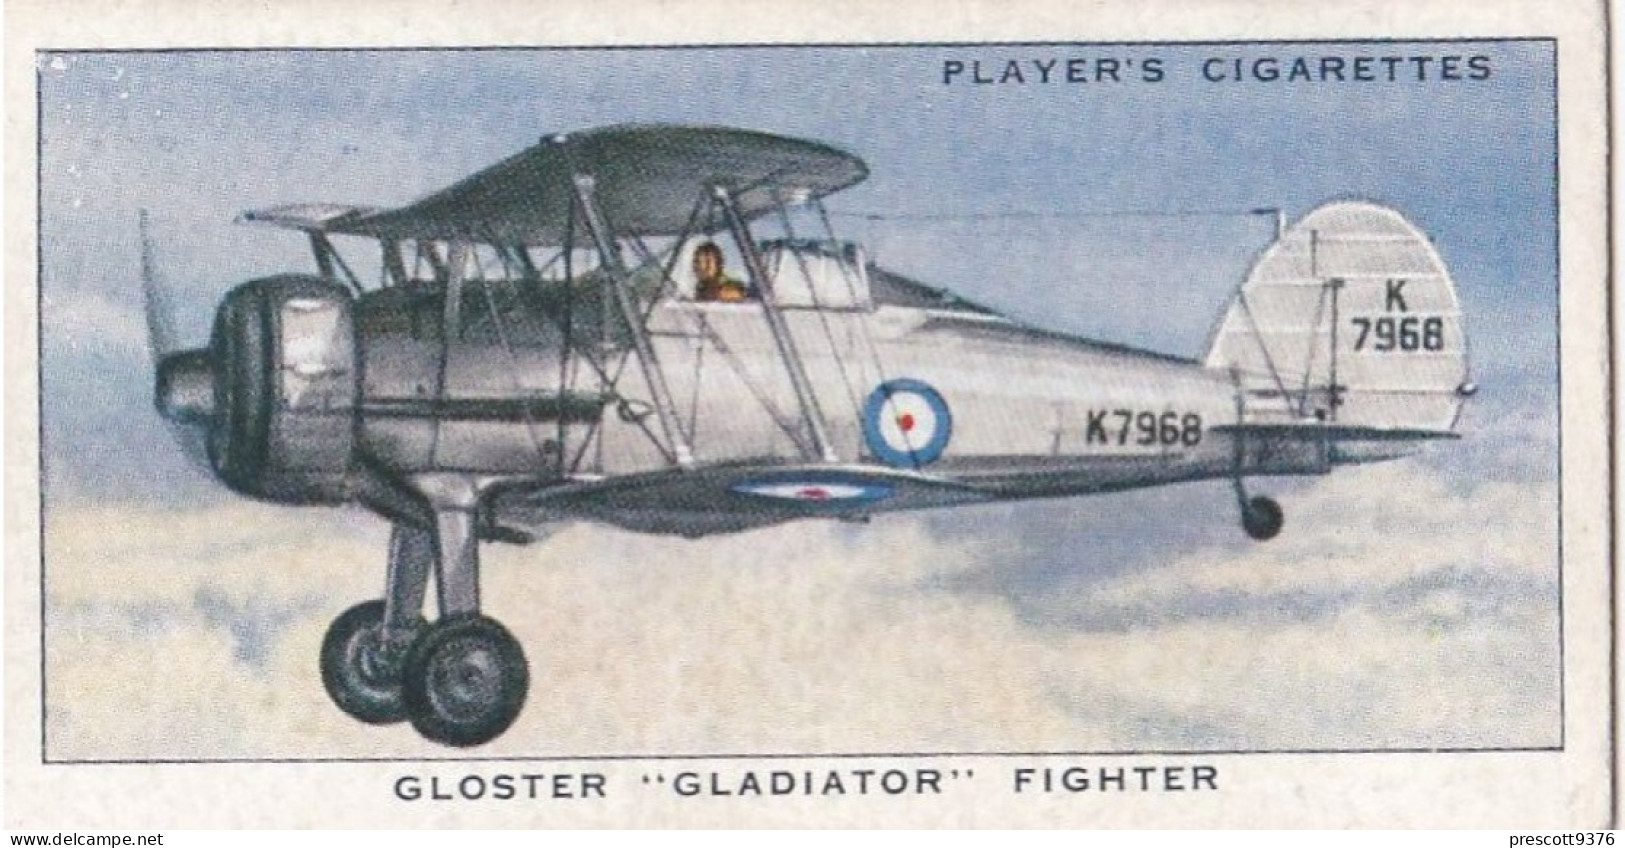 22 Gloster Gladiator - Aircraft Of The Royal Air Force 1938 - Players Original Cigarette Card - Military - Player's